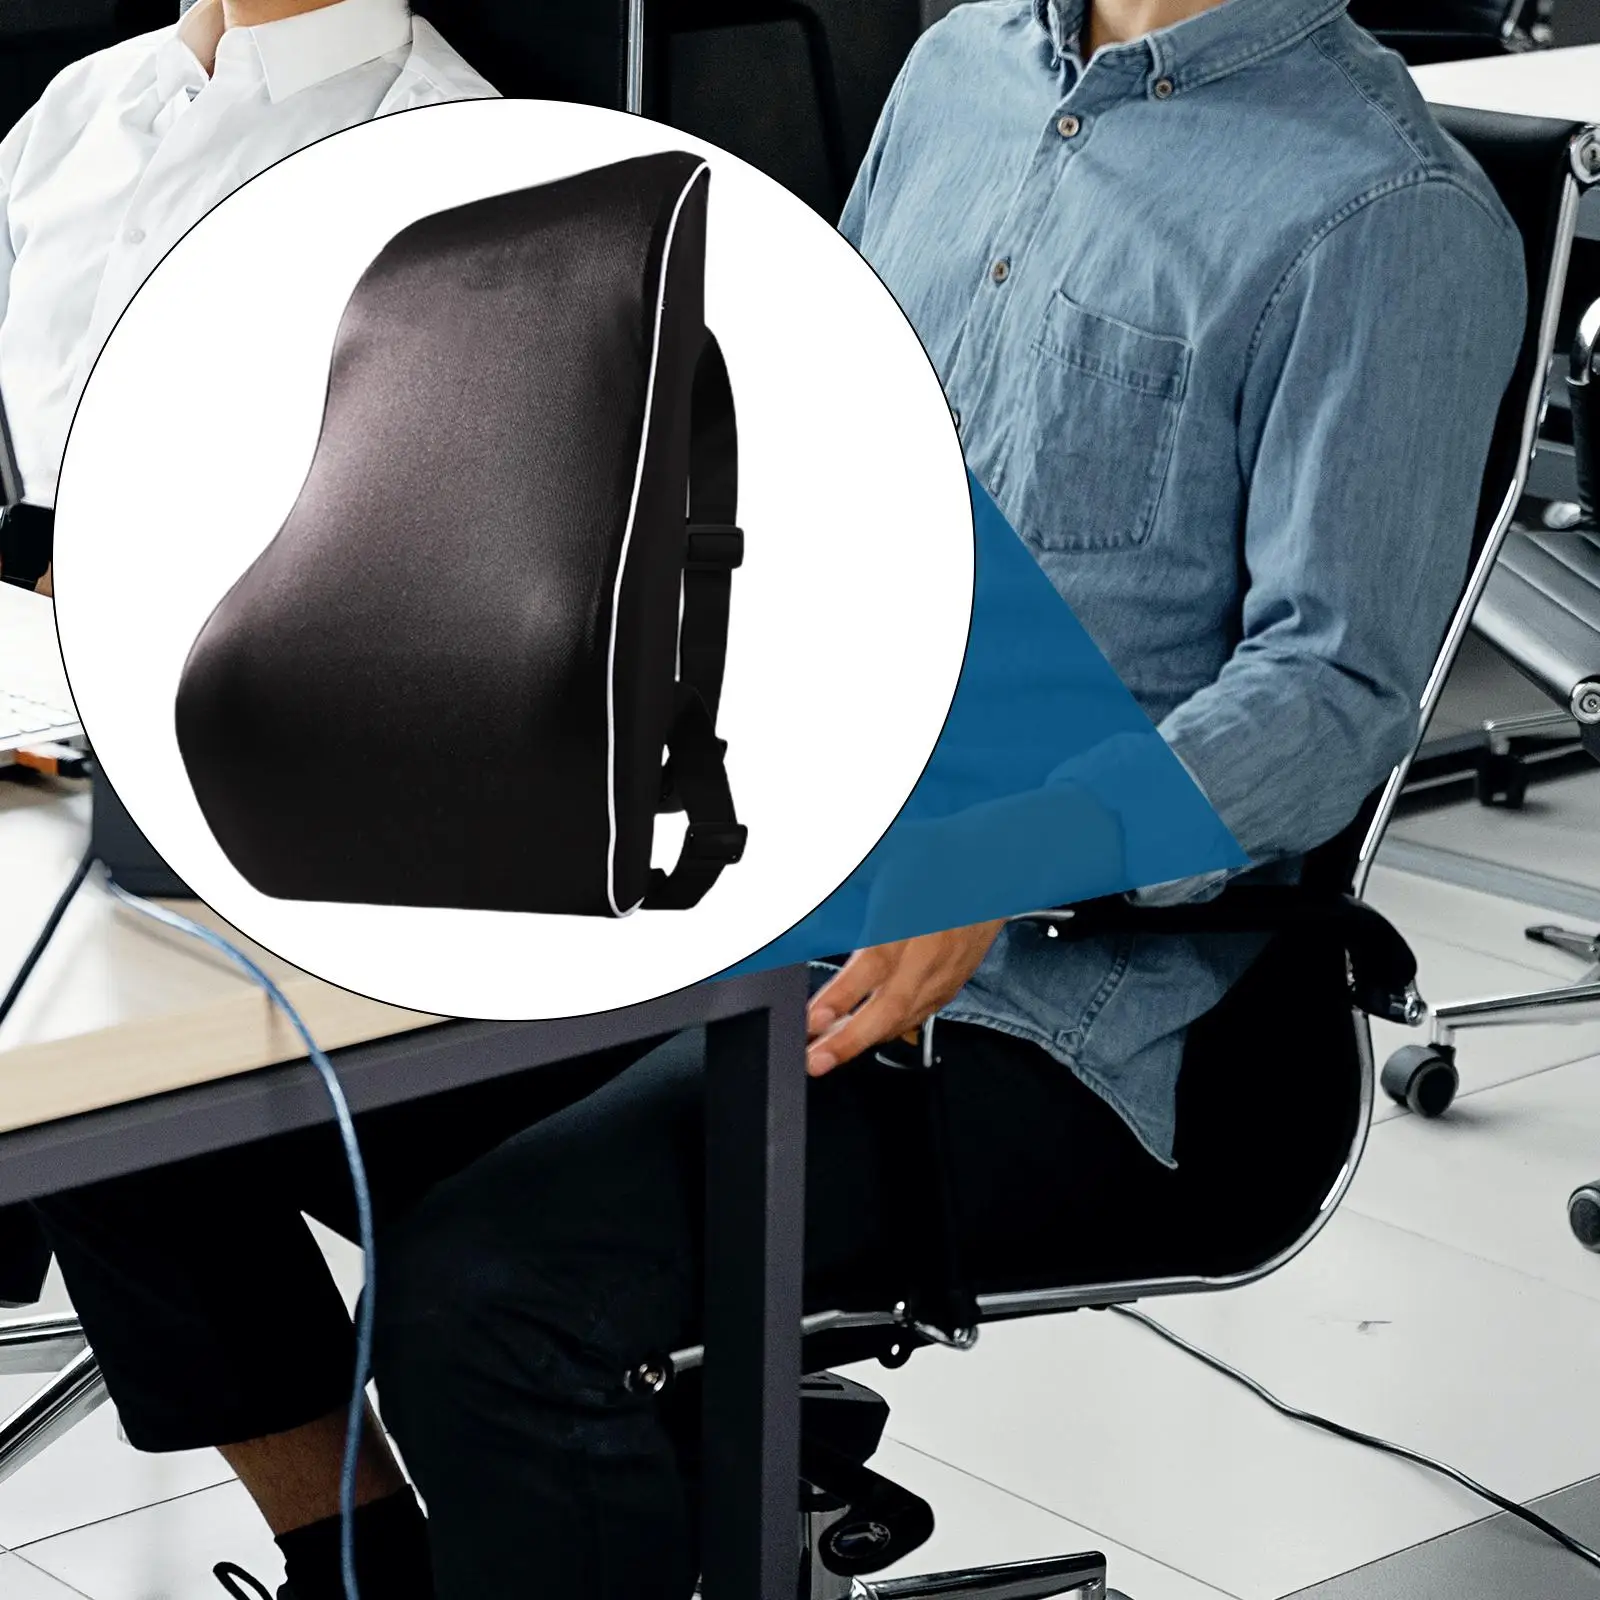  Support , Backrest  Cushion Posture Cushions  Computer, Gaming  Wheels Home Drivers